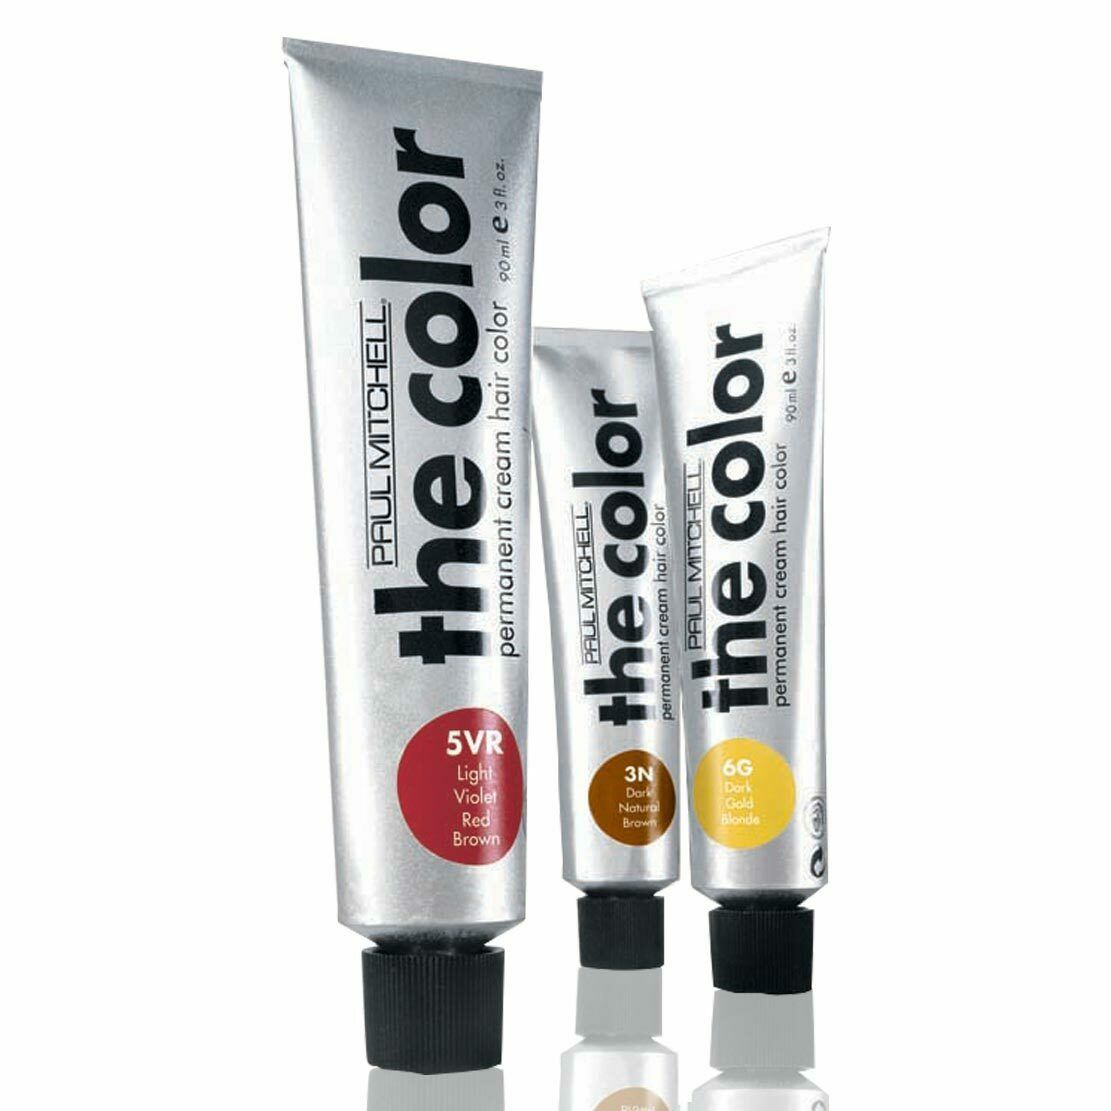 Paul Mitchell THE COLOR Permanent Cream Hair Color 3oz (7CB) - $13.95